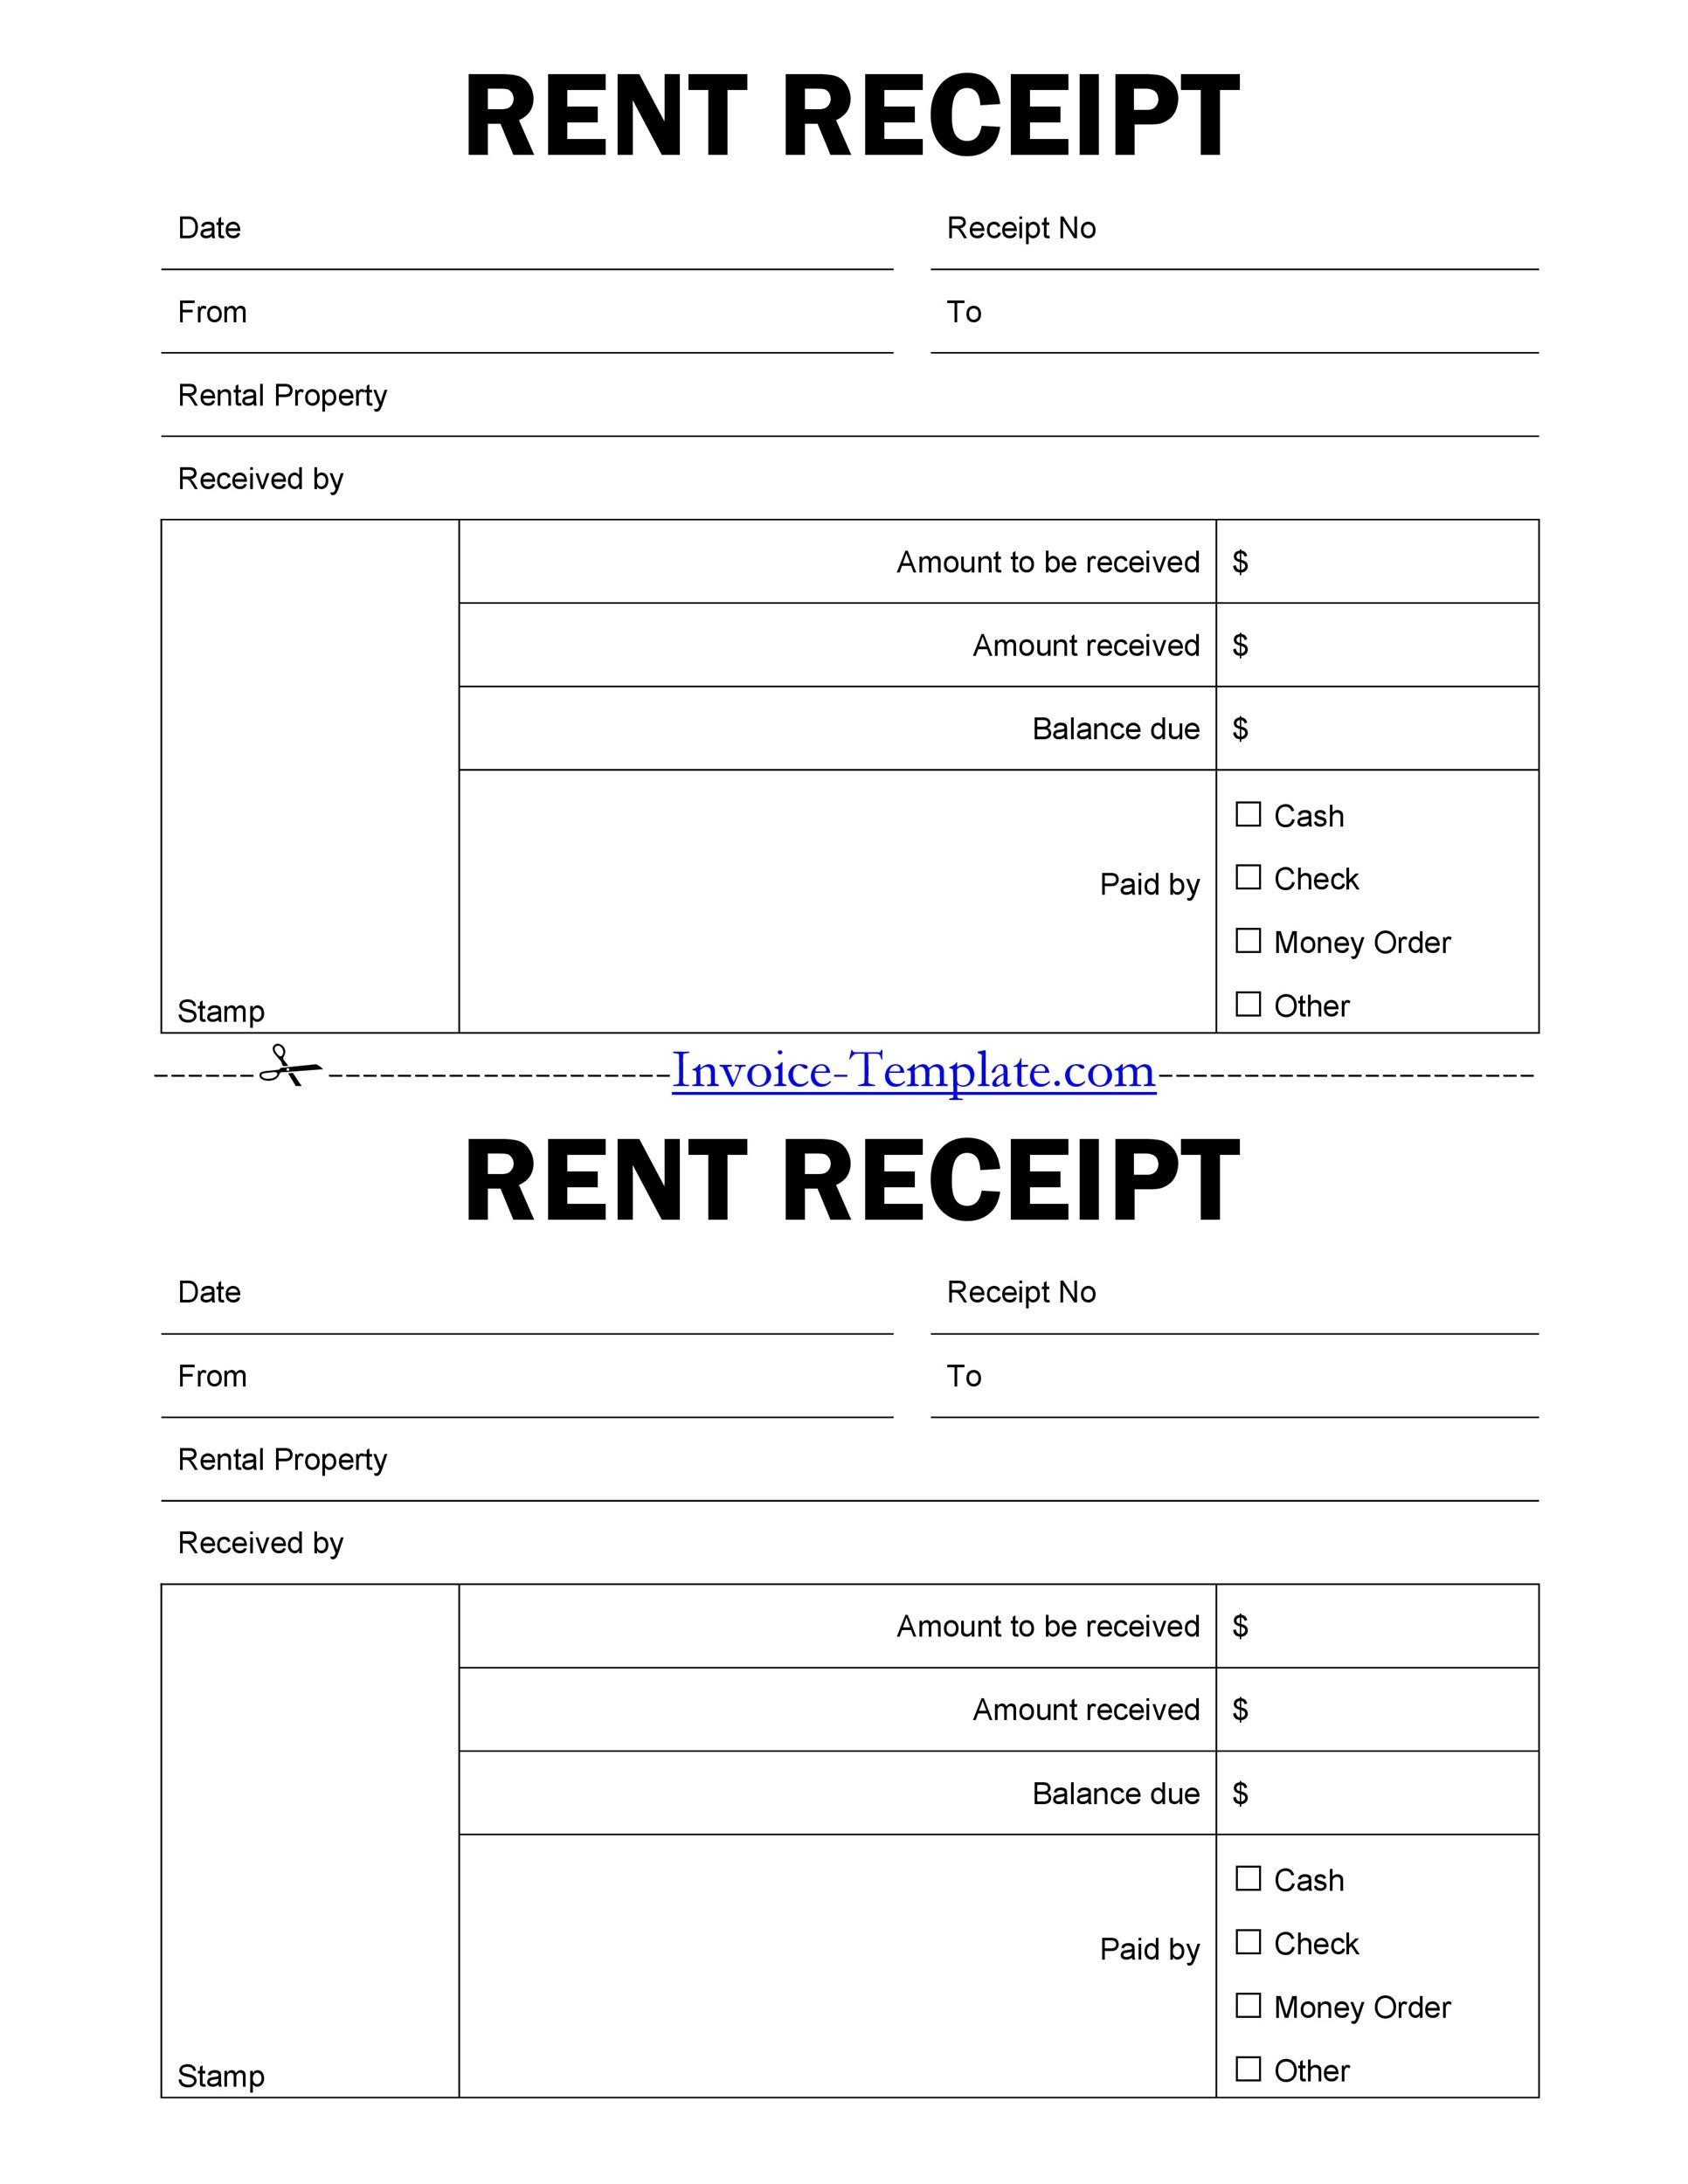 rent-receipt-format-uses-mandatory-revenue-stamp-clause